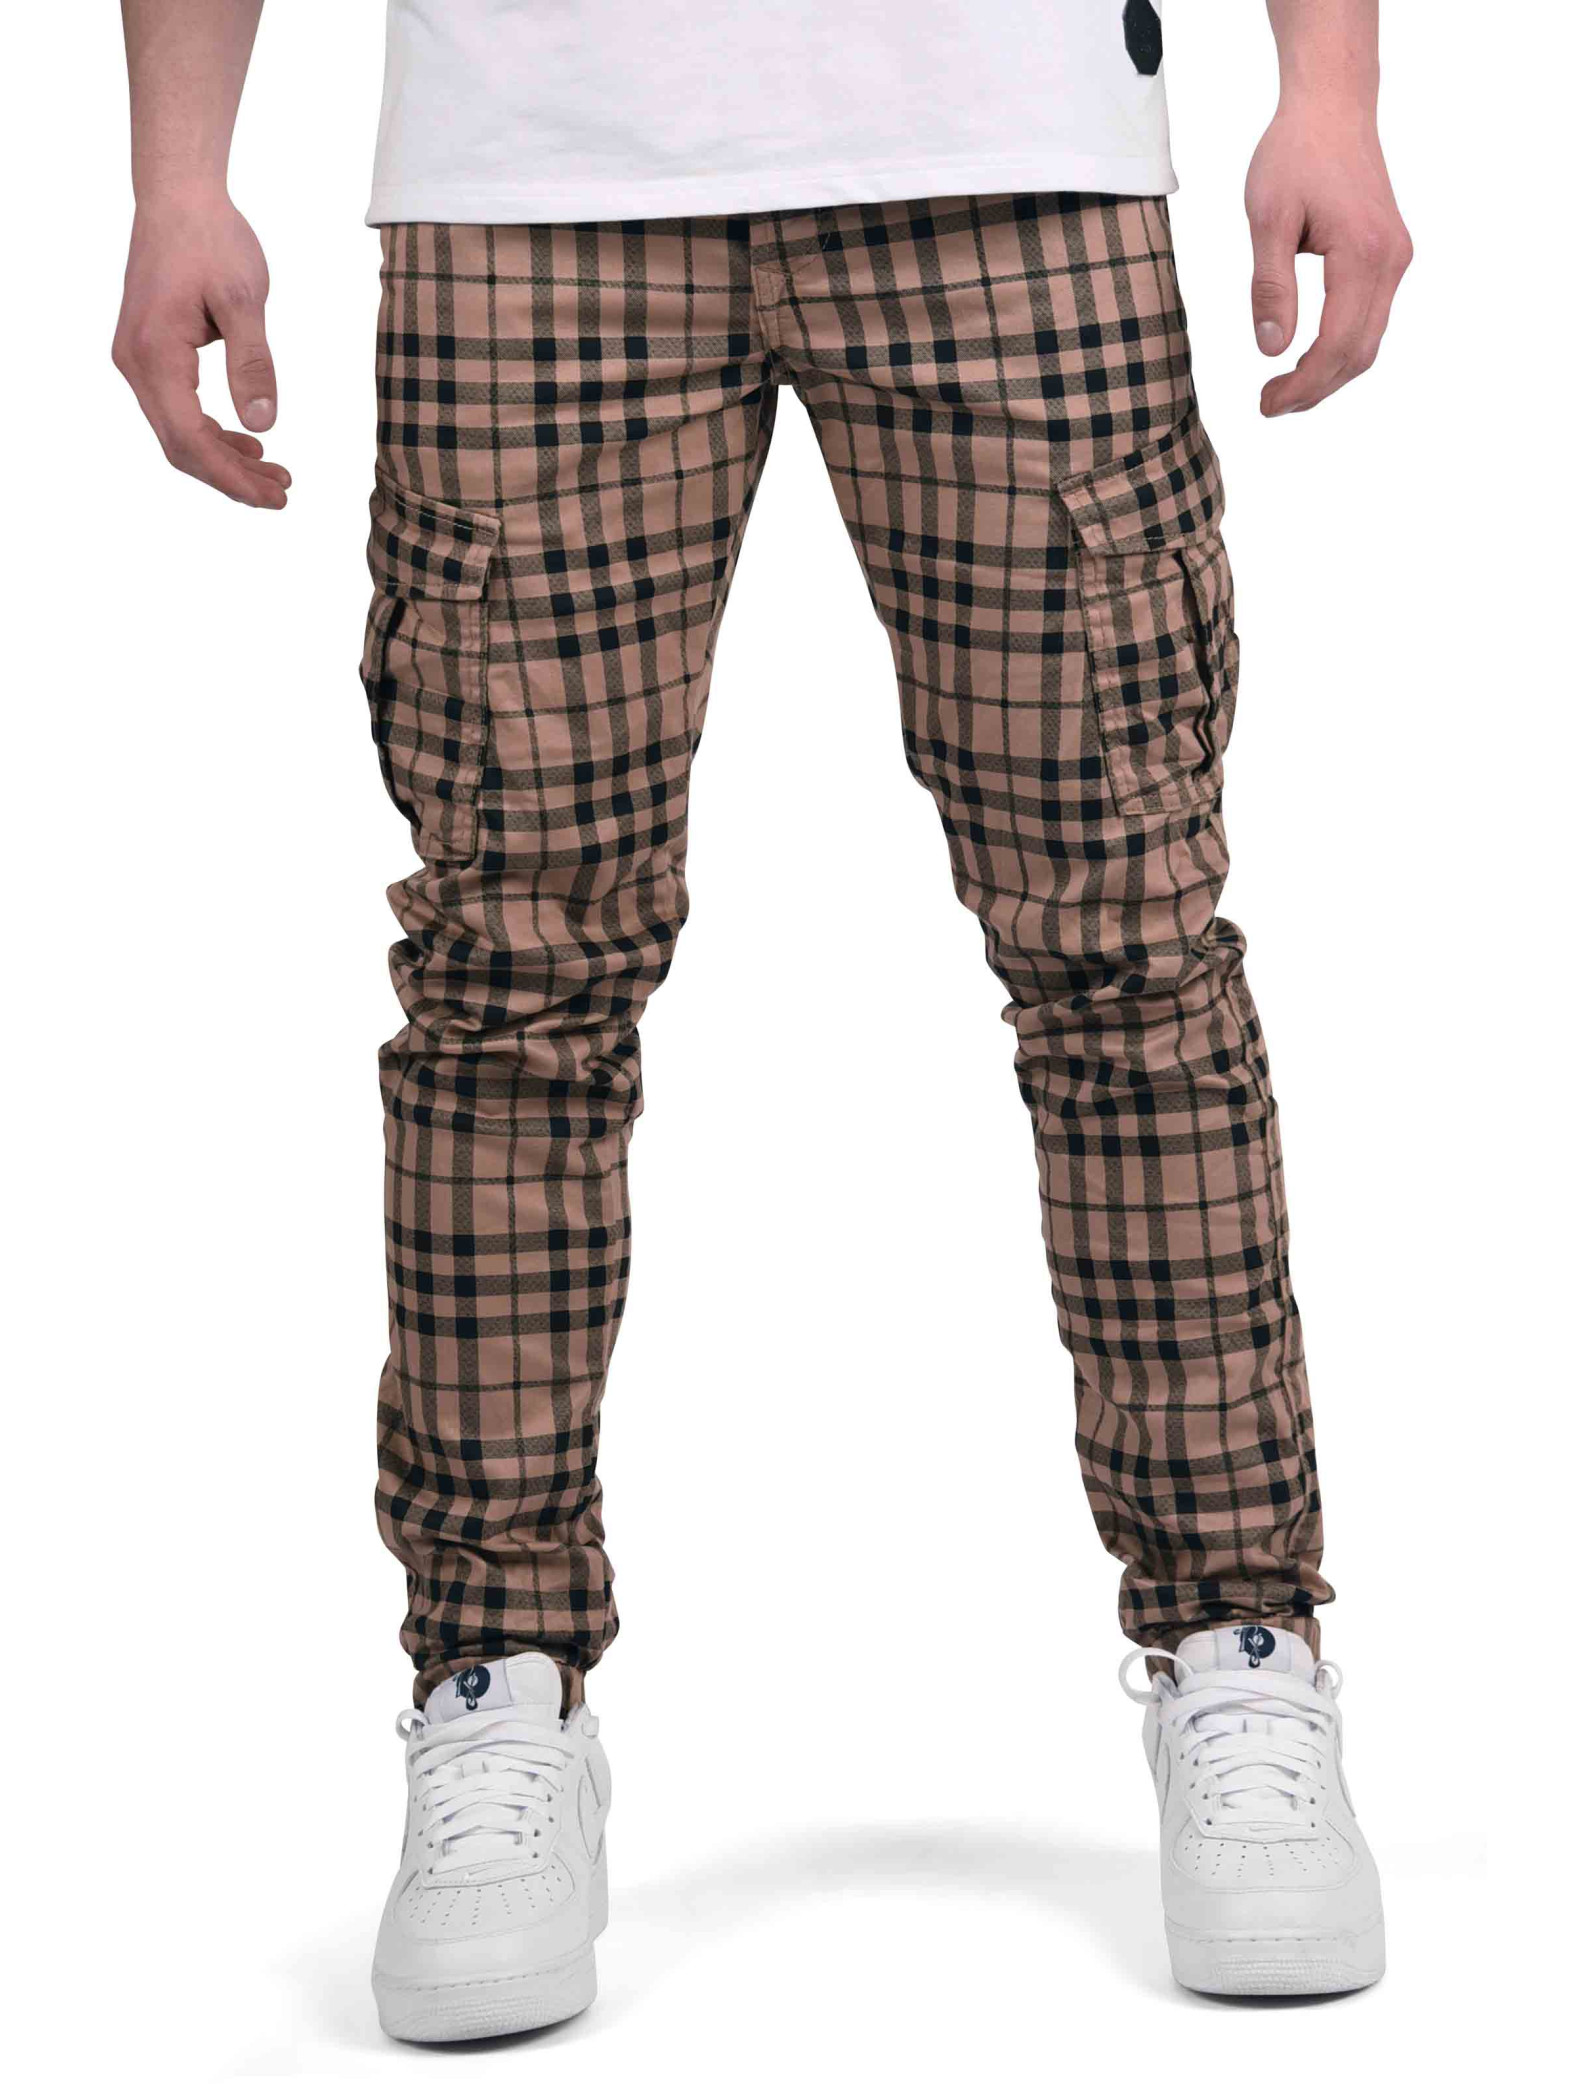 Men's Pants with Cargo Pockets in Check Project X Paris